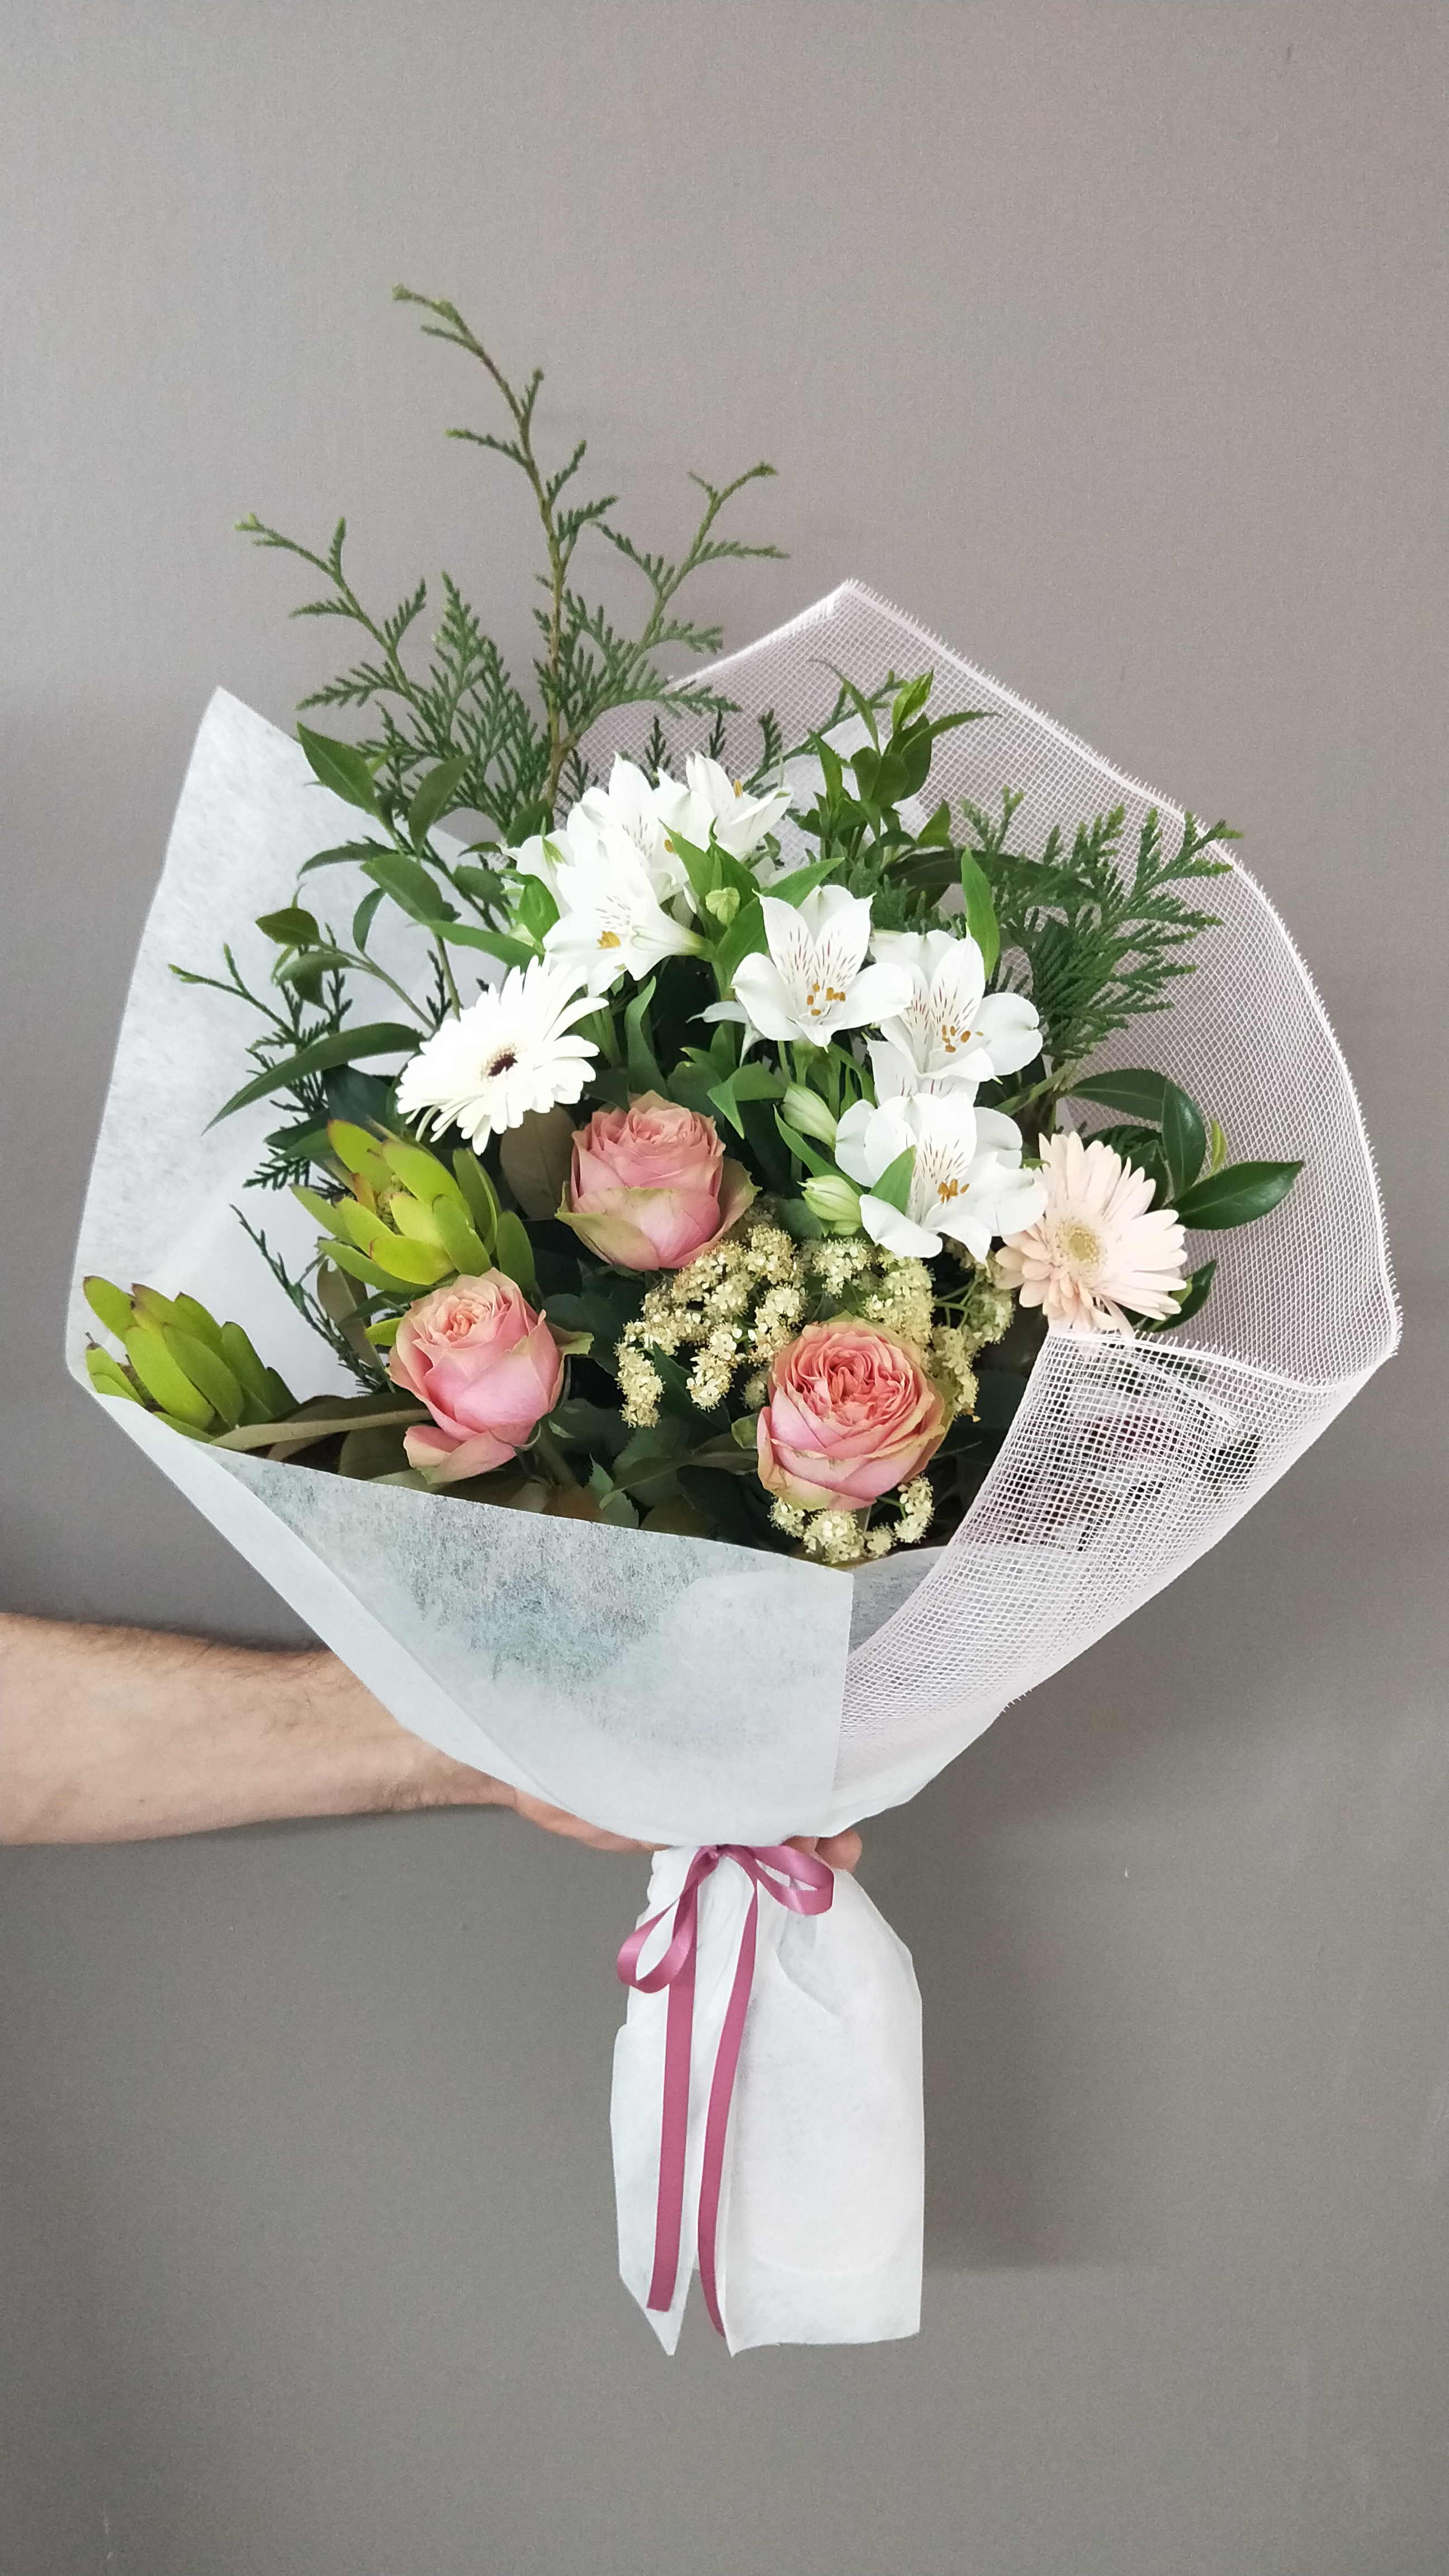 Irresistible bouquet makes an ideal gift for many occasions.